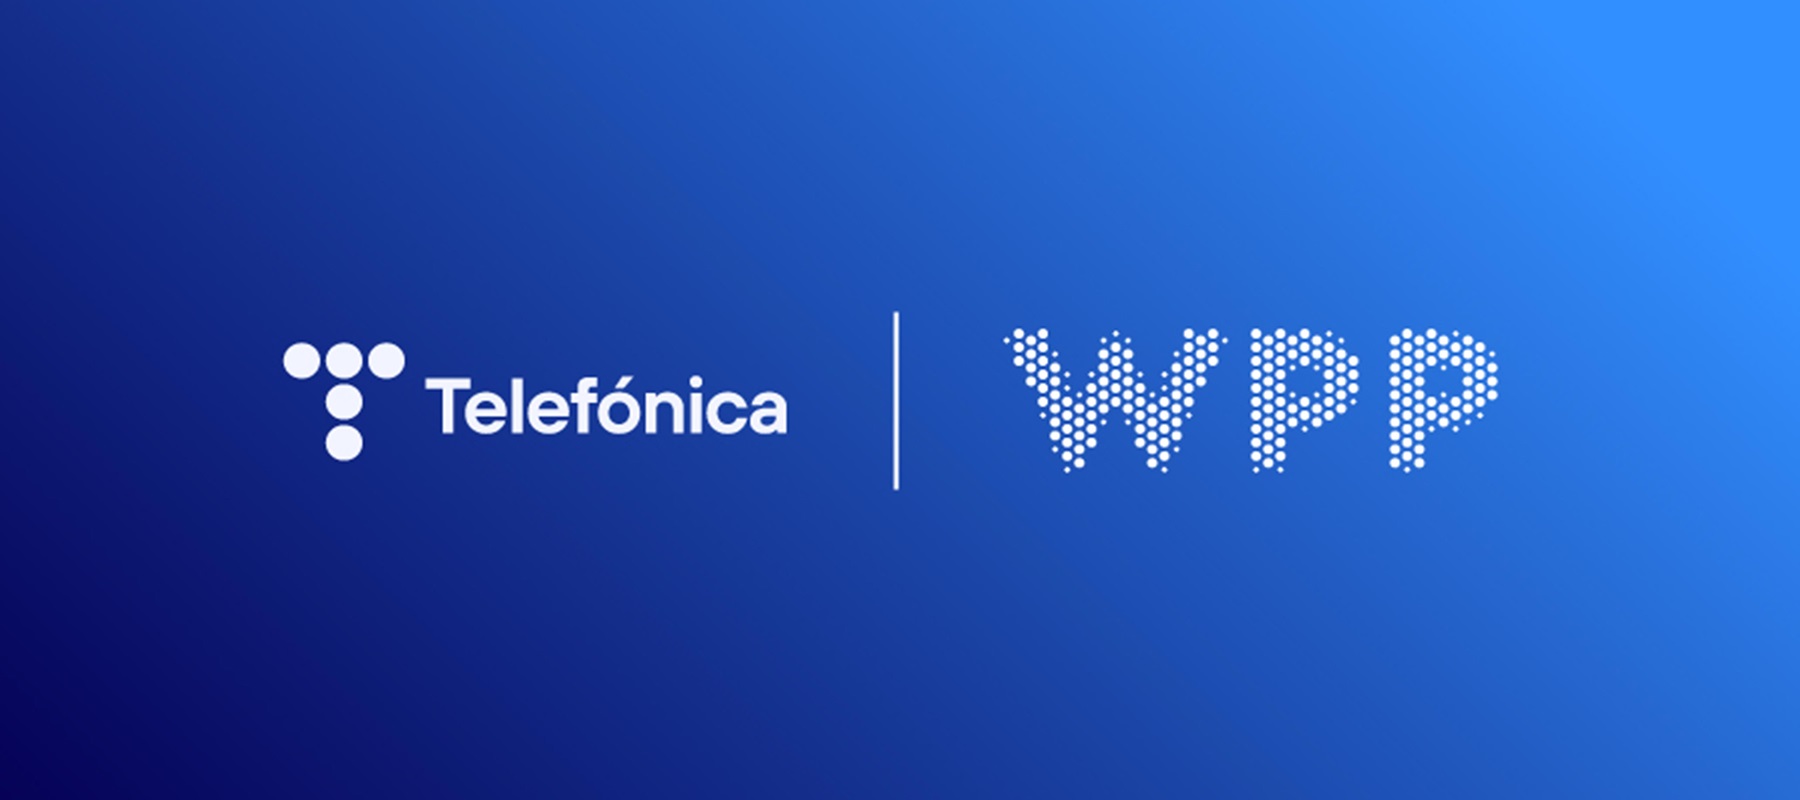 WPP expands its business with Telefónica in Latin America